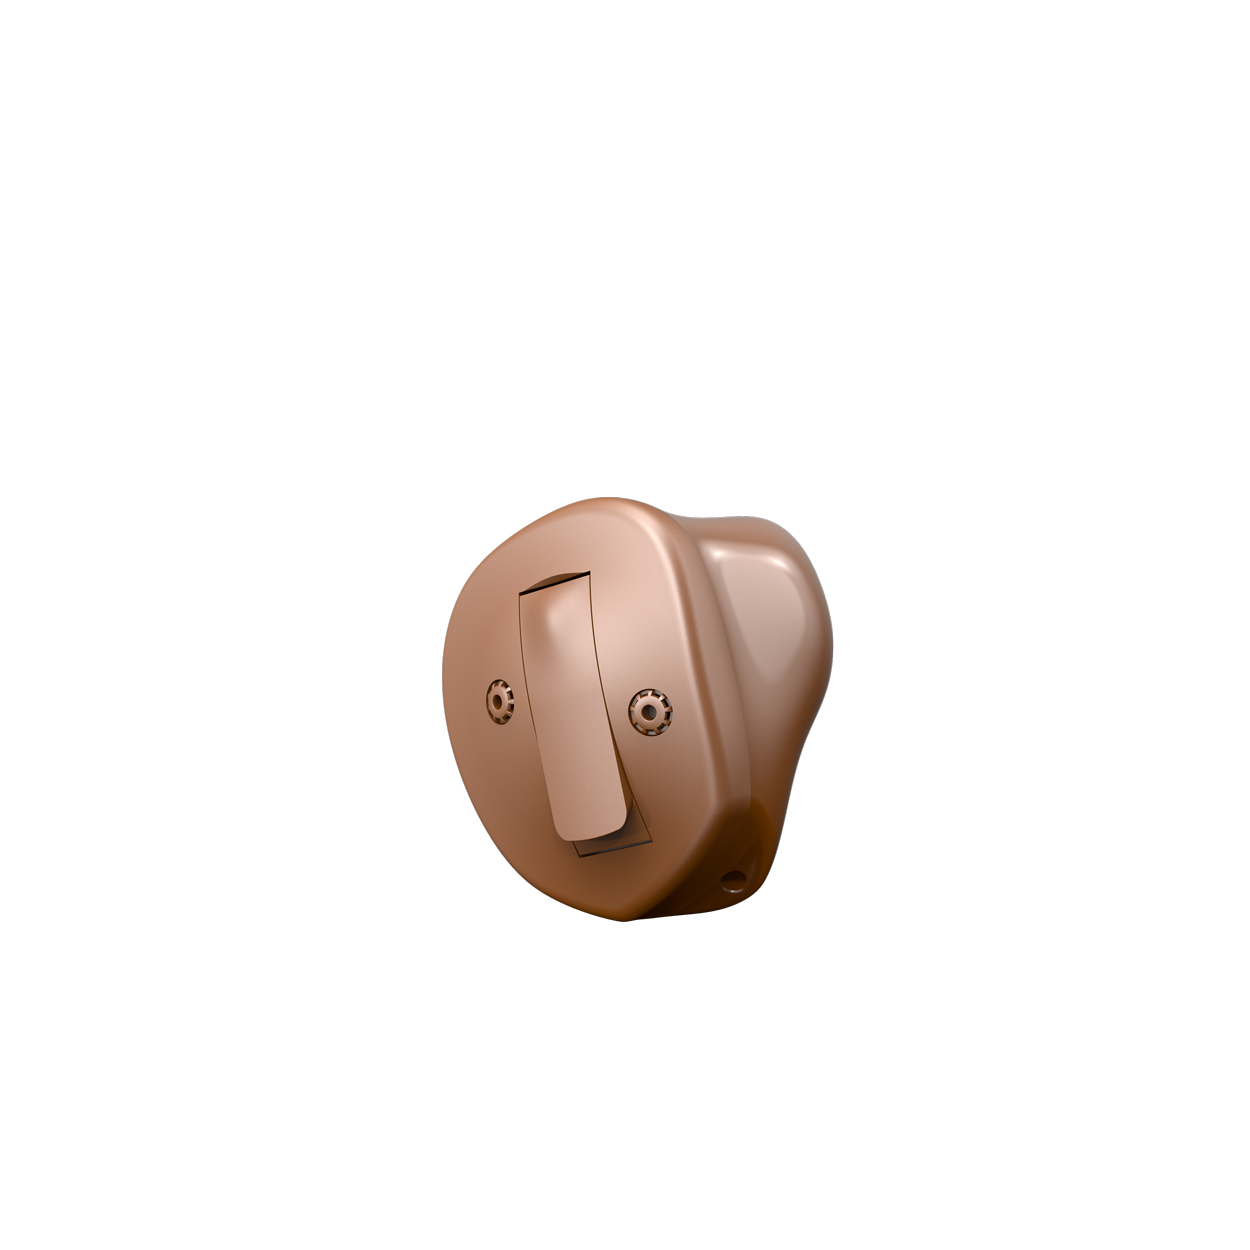 Oticon Own 2 ITE Half Shell, Medium Brown image number 1.0